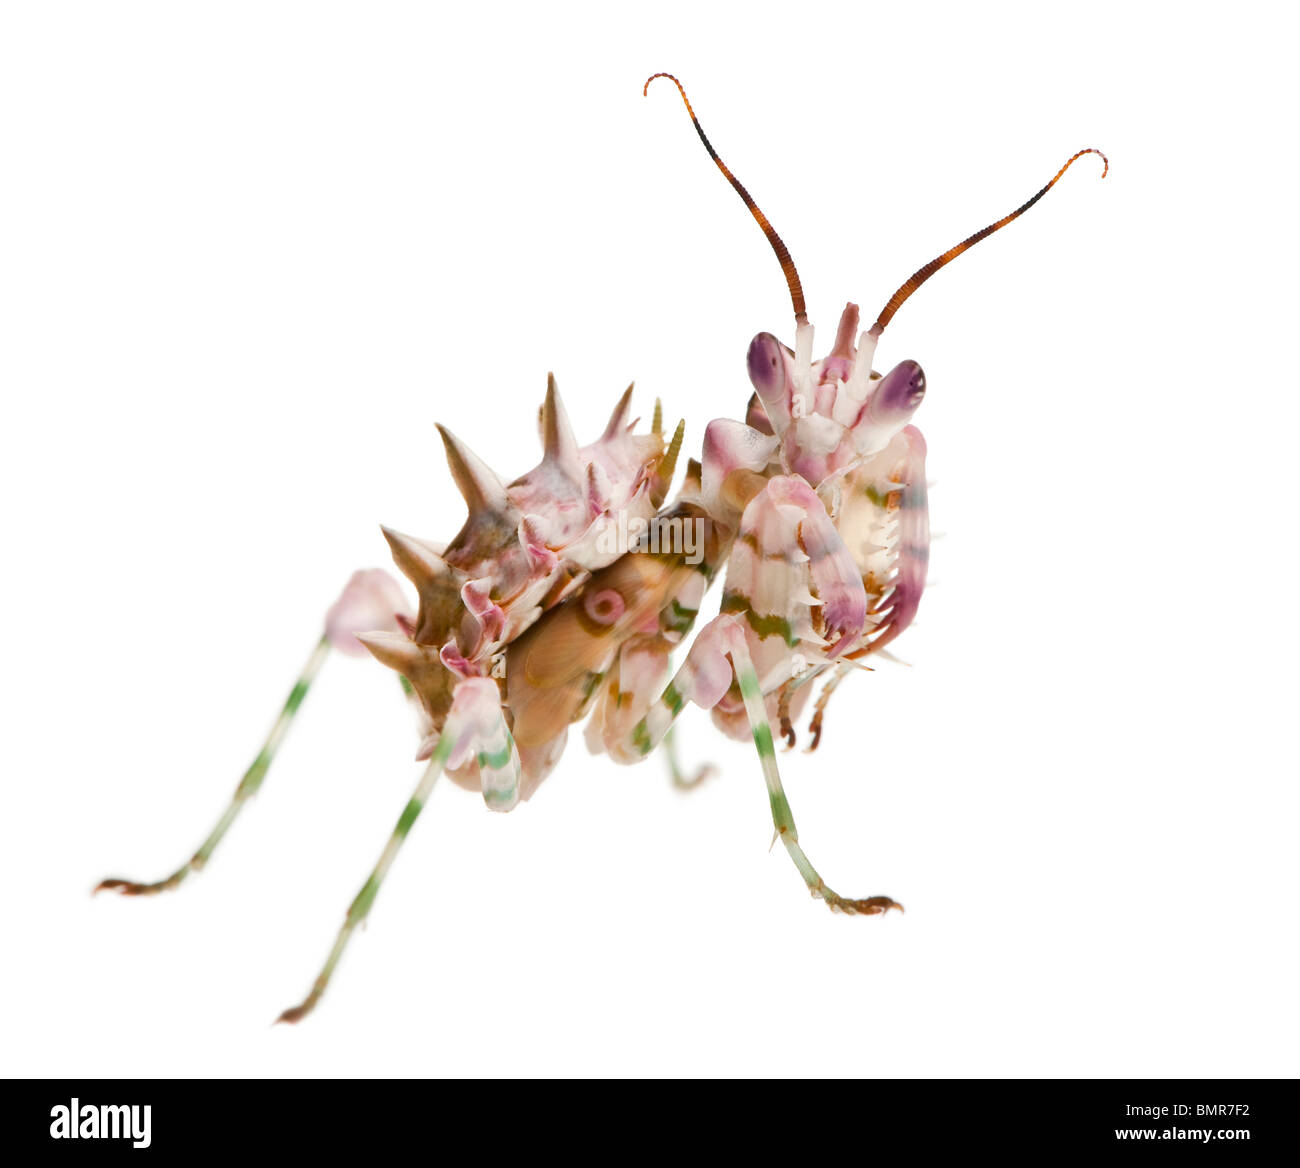 Spiny flower mantis, Flower Mantis, Pseudocreobotra Wahlbergii, in front of white background Stock Photo